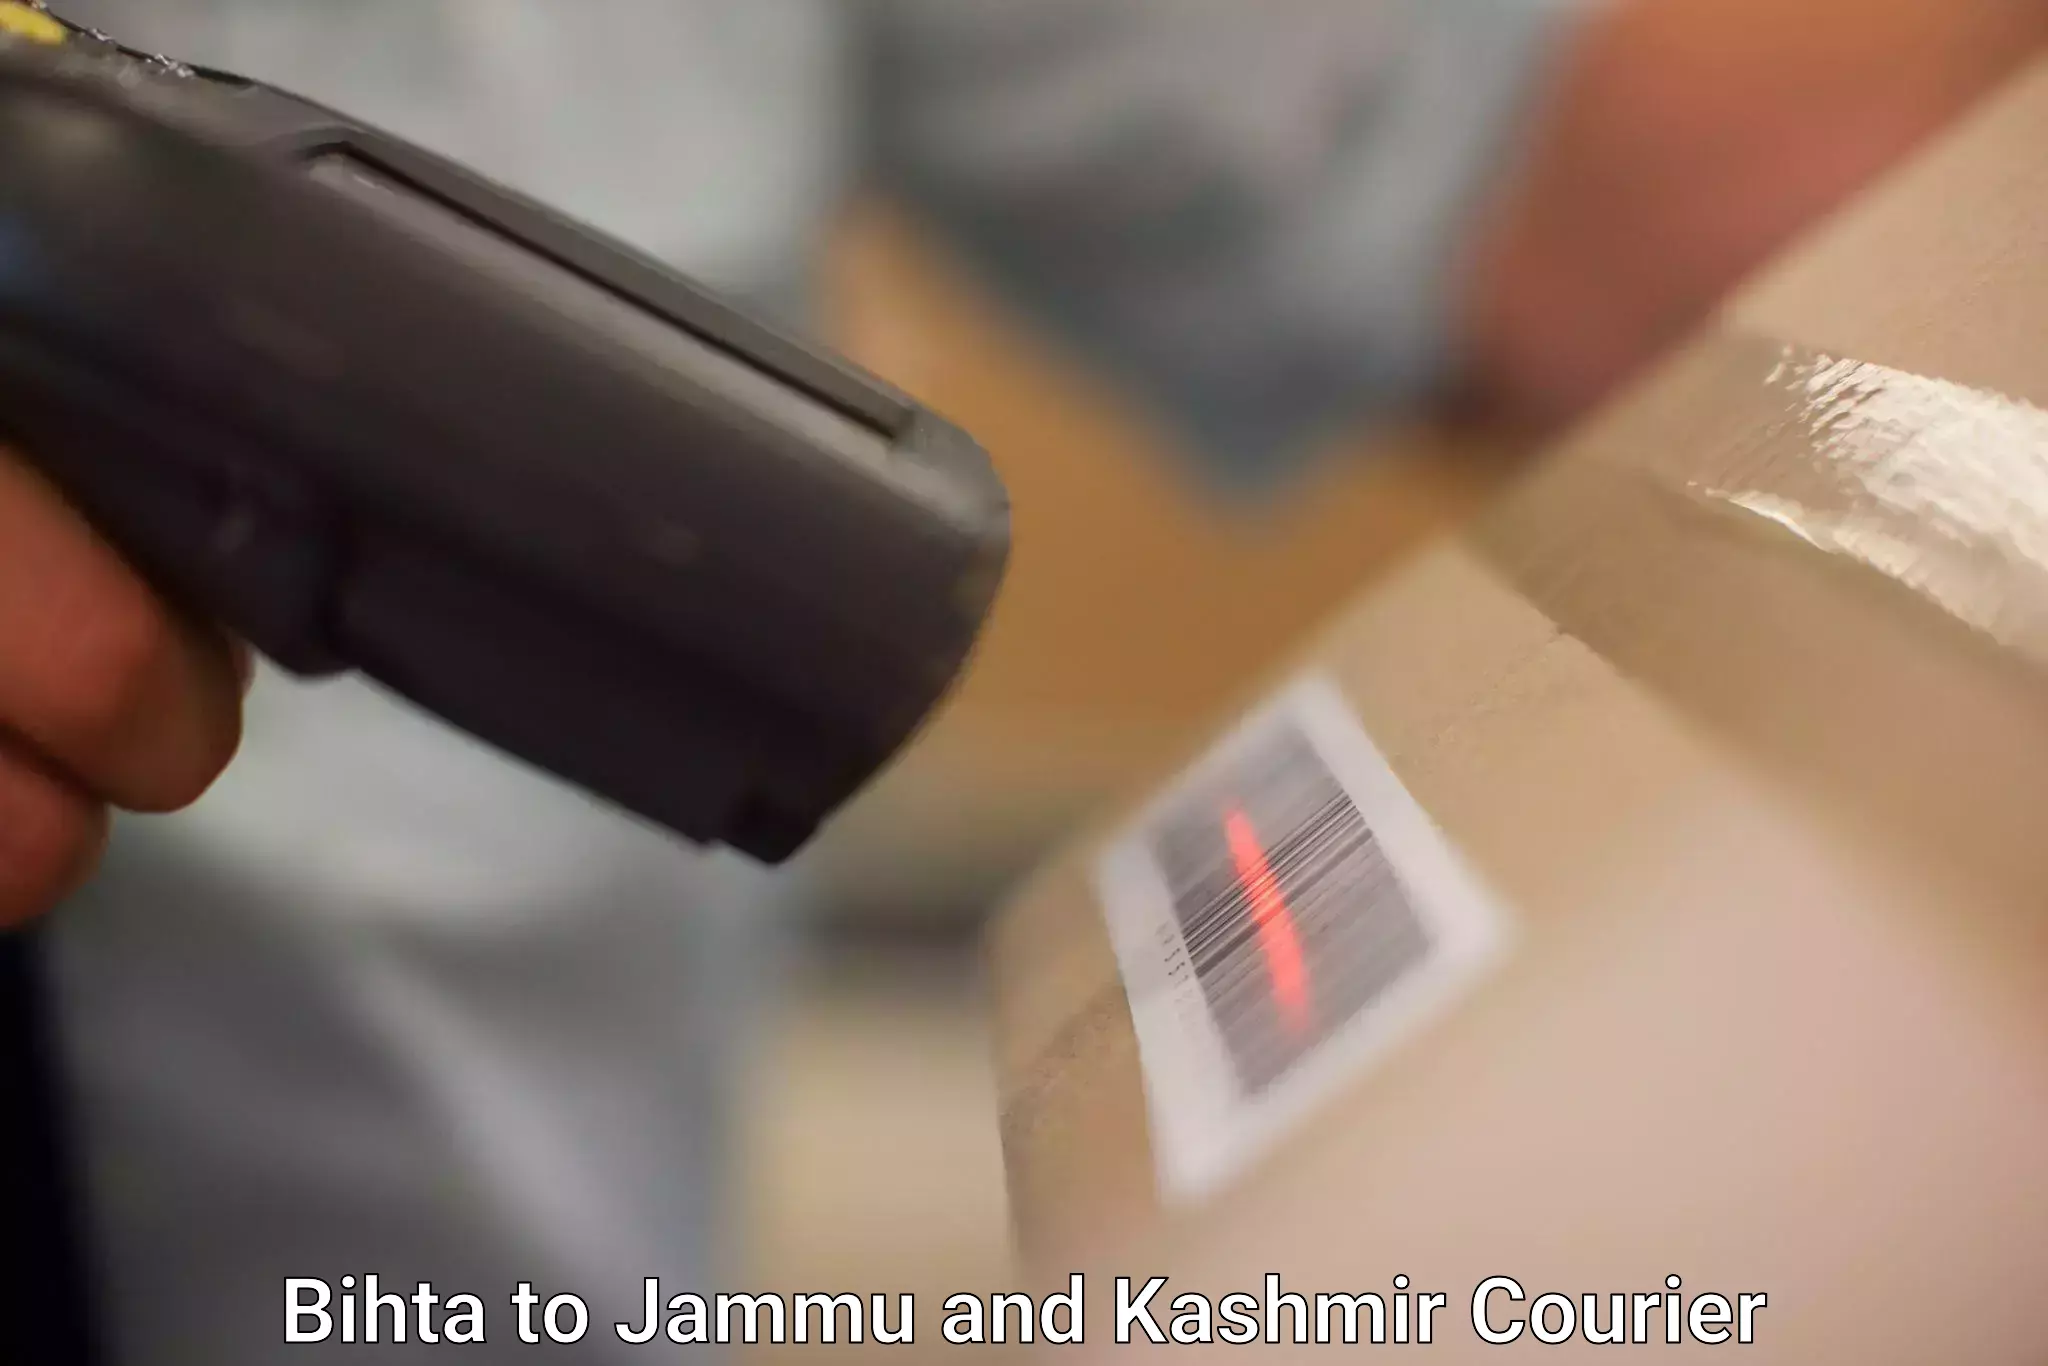 Quality courier services Bihta to University of Jammu